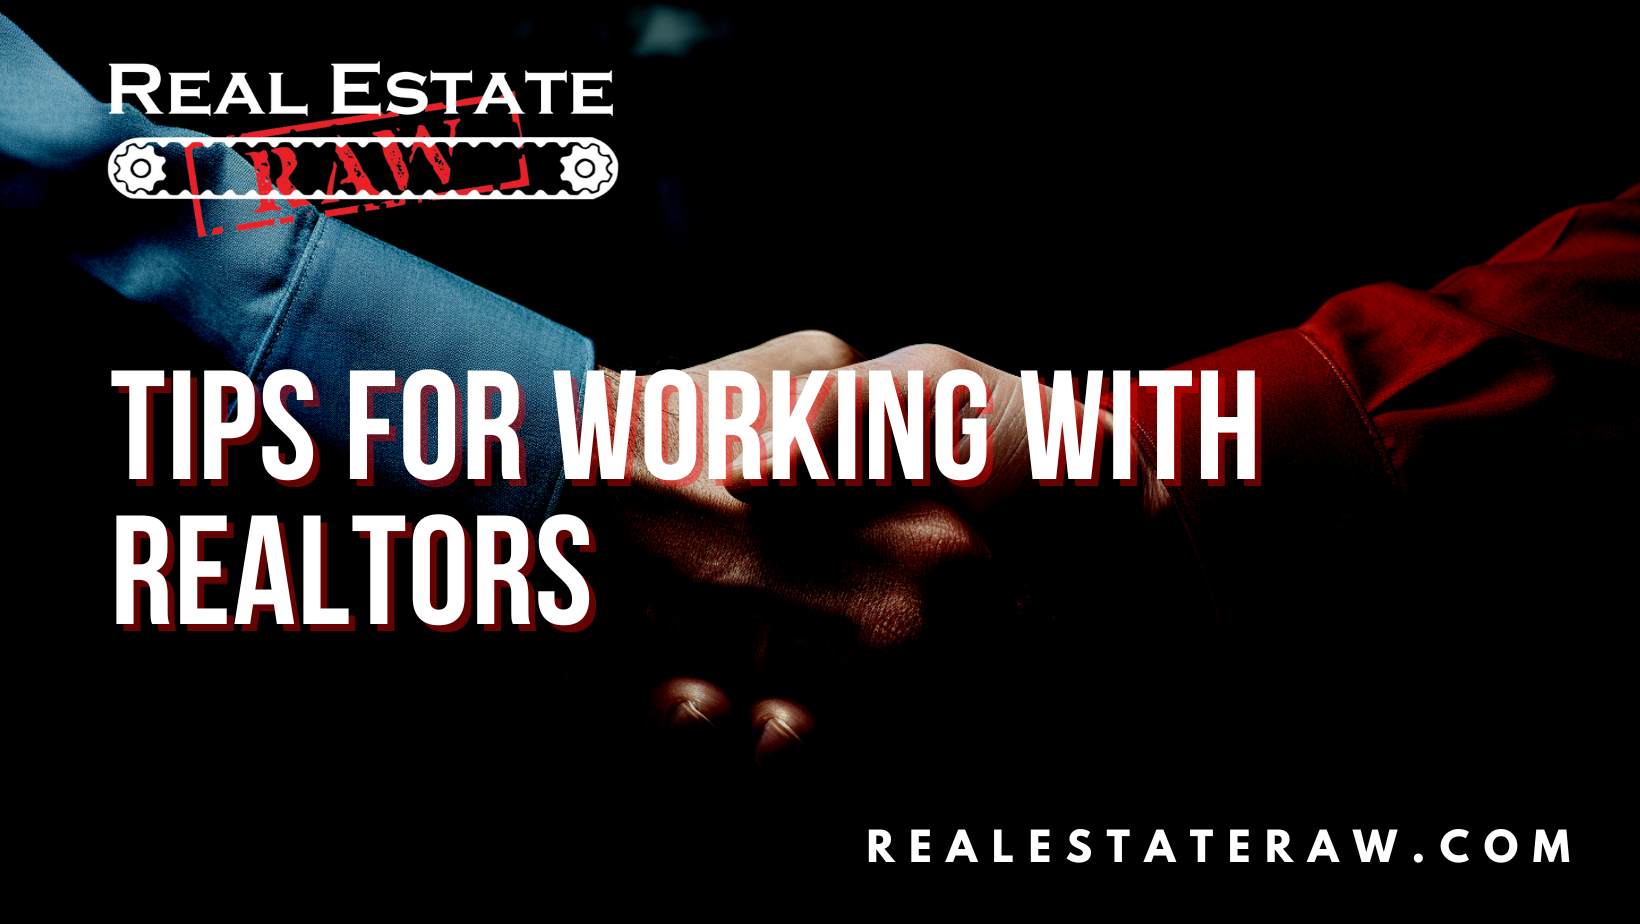 Tips for Working with Realtors